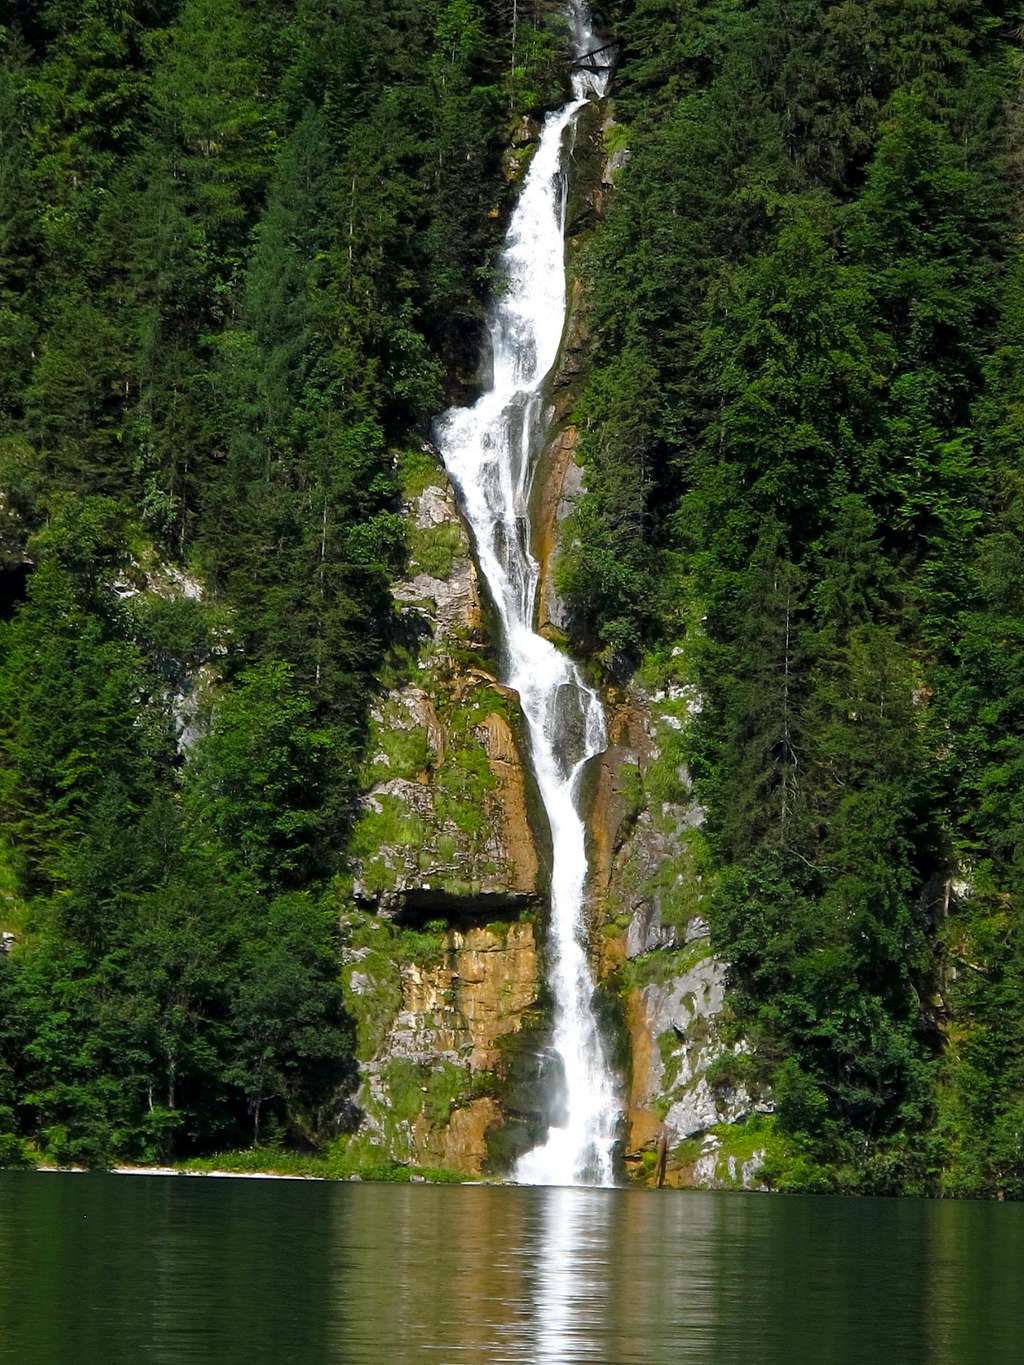 Waterfall above the upper part of the Königssee lake